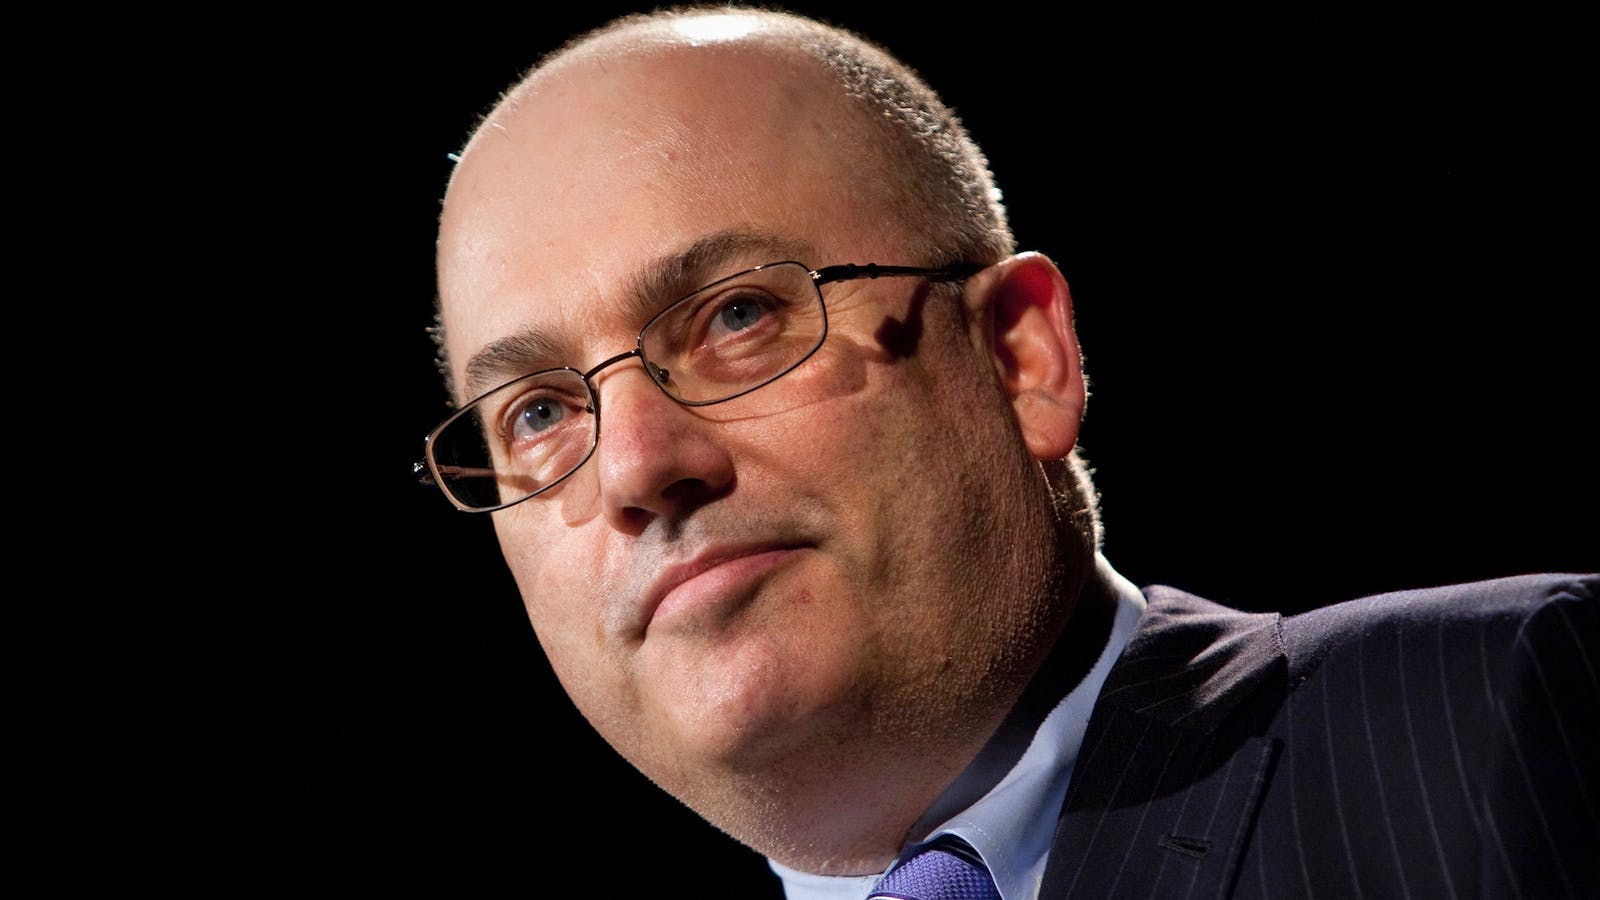 Hedge fund billionaire Steve Cohen. Photo by Bloomberg.